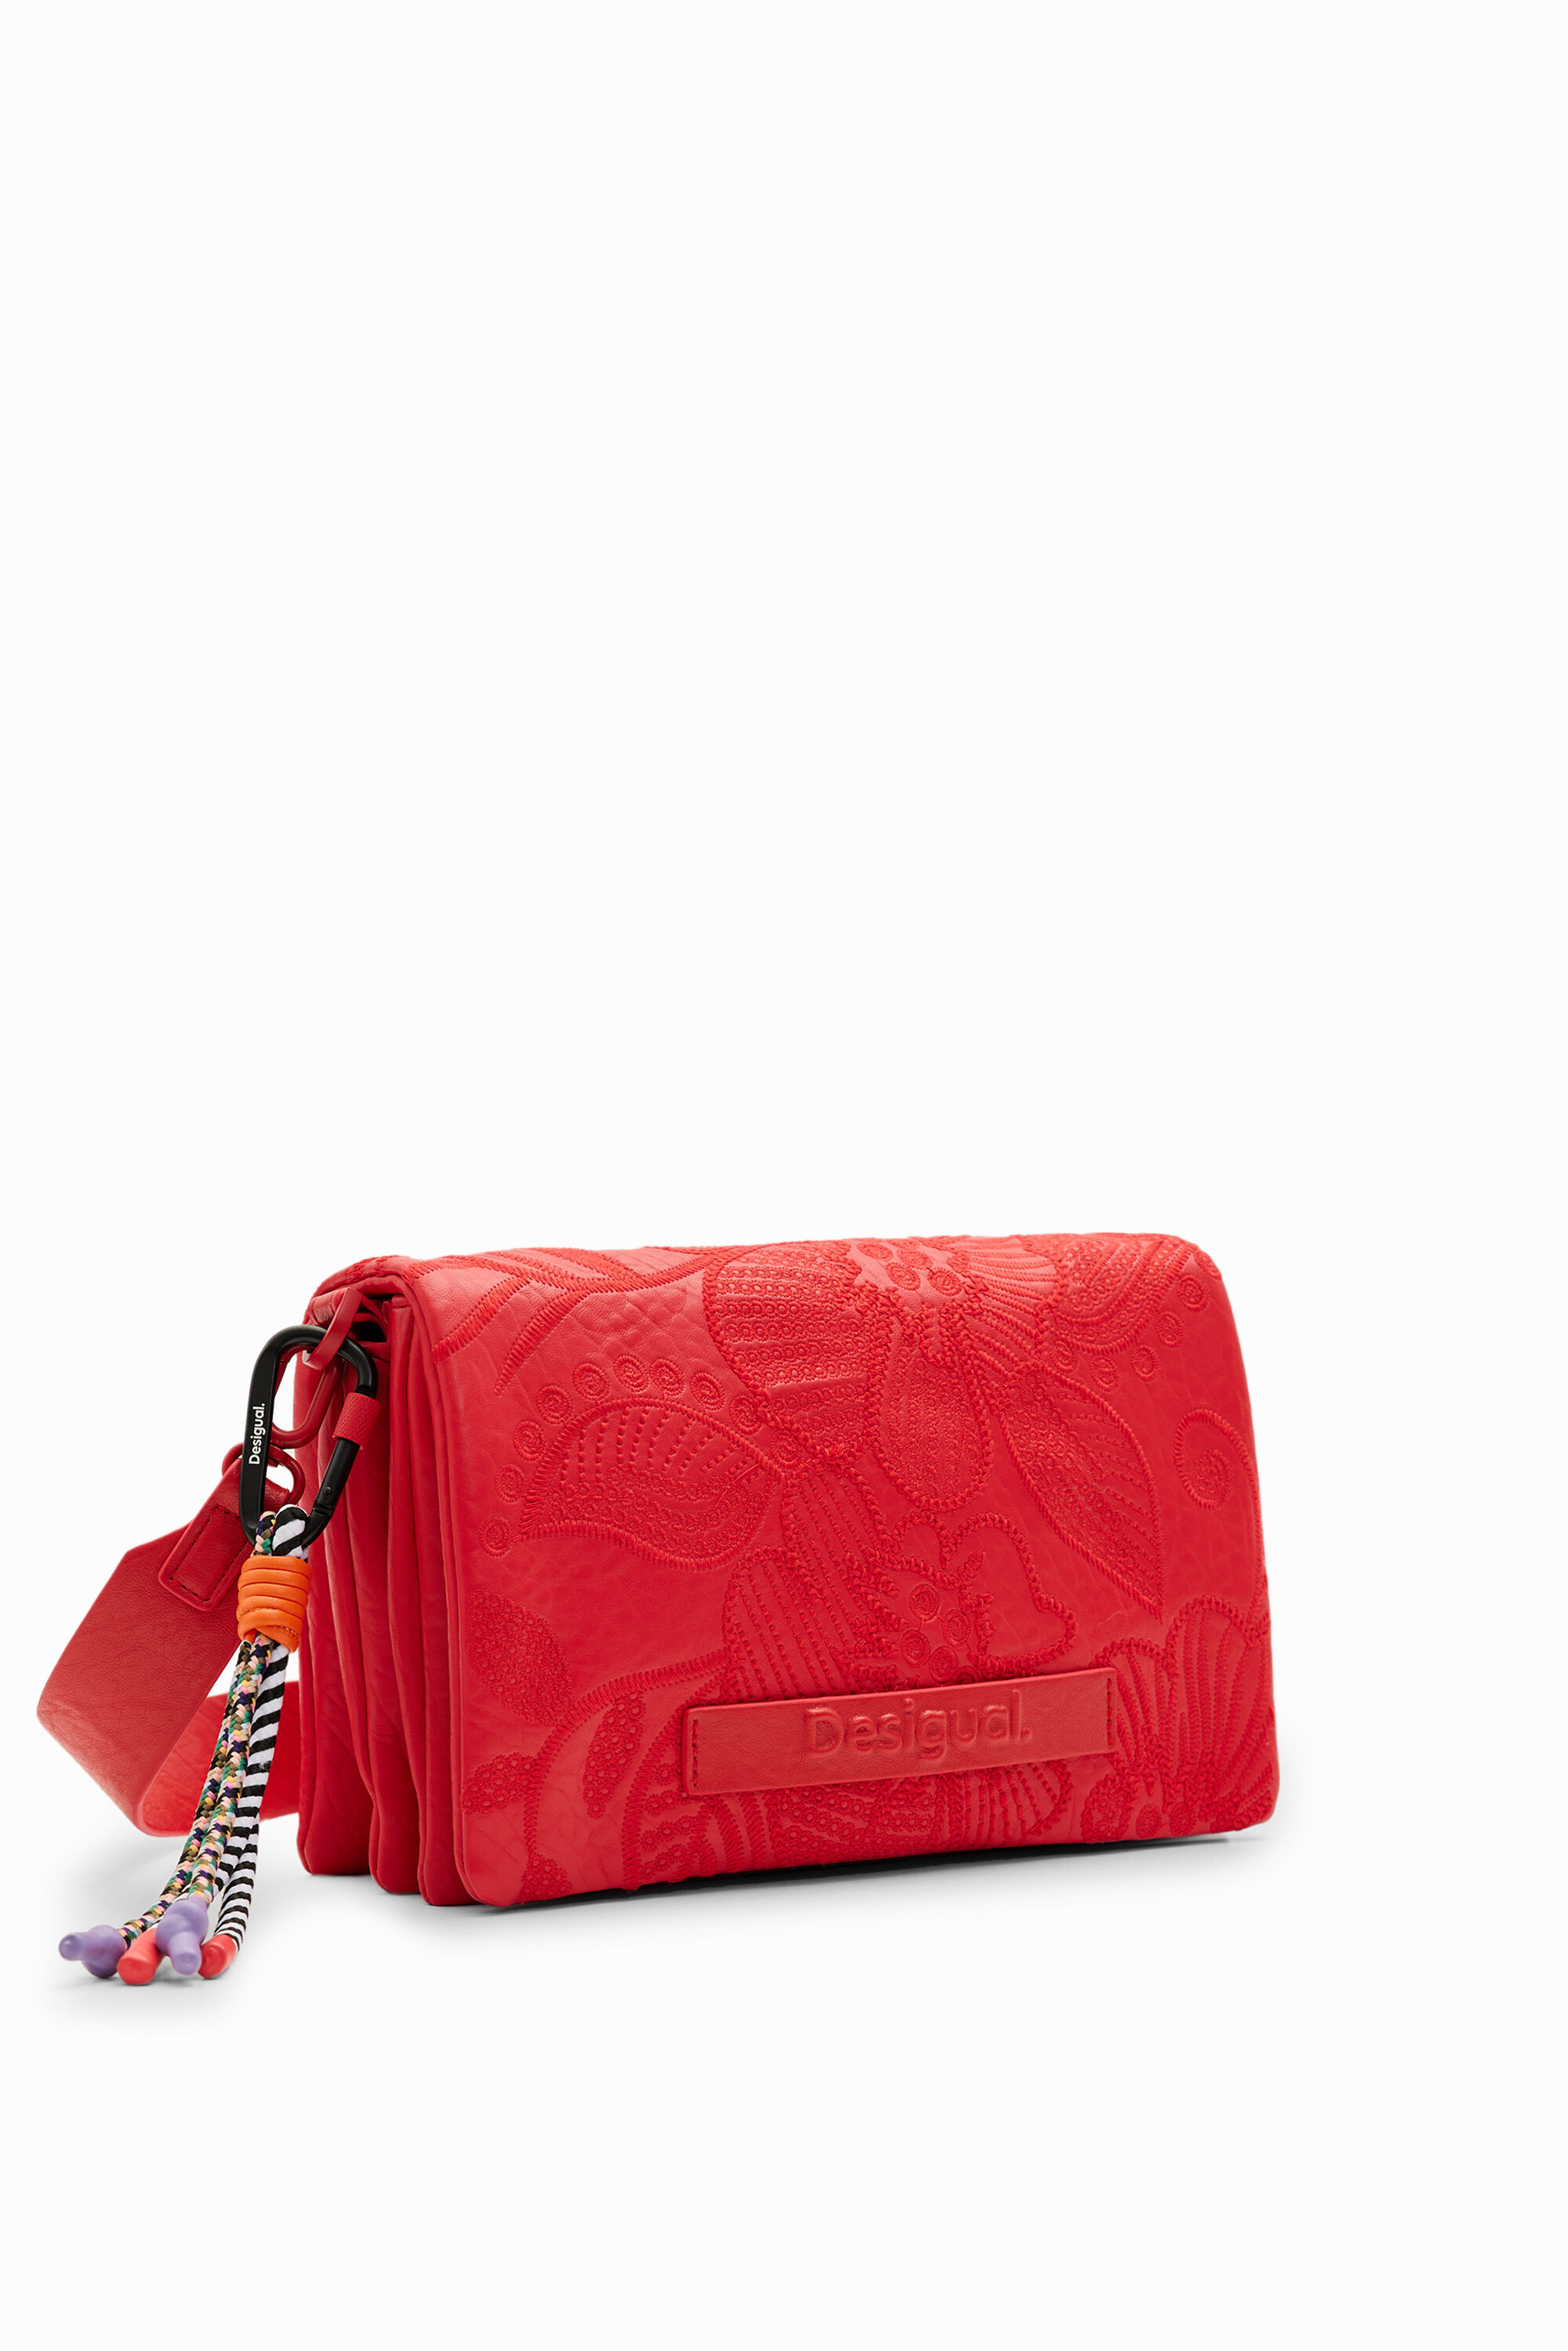 M embroidered floral crossbody bag - RED - U